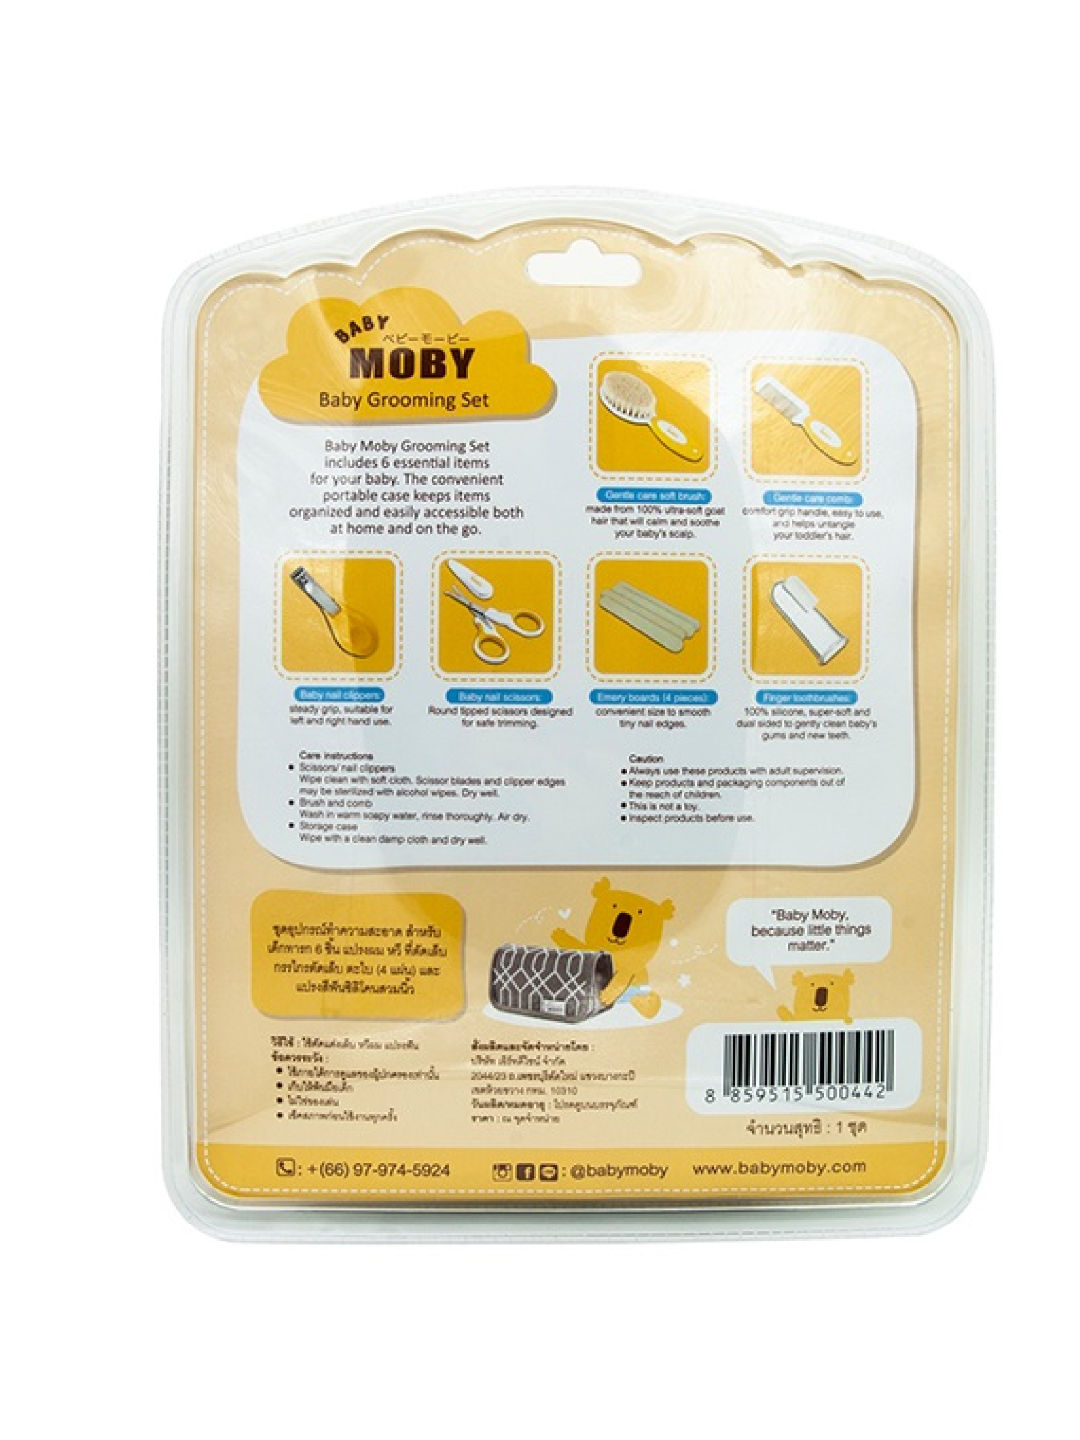 Baby Moby Grooming Kit (No Color- Image 2)